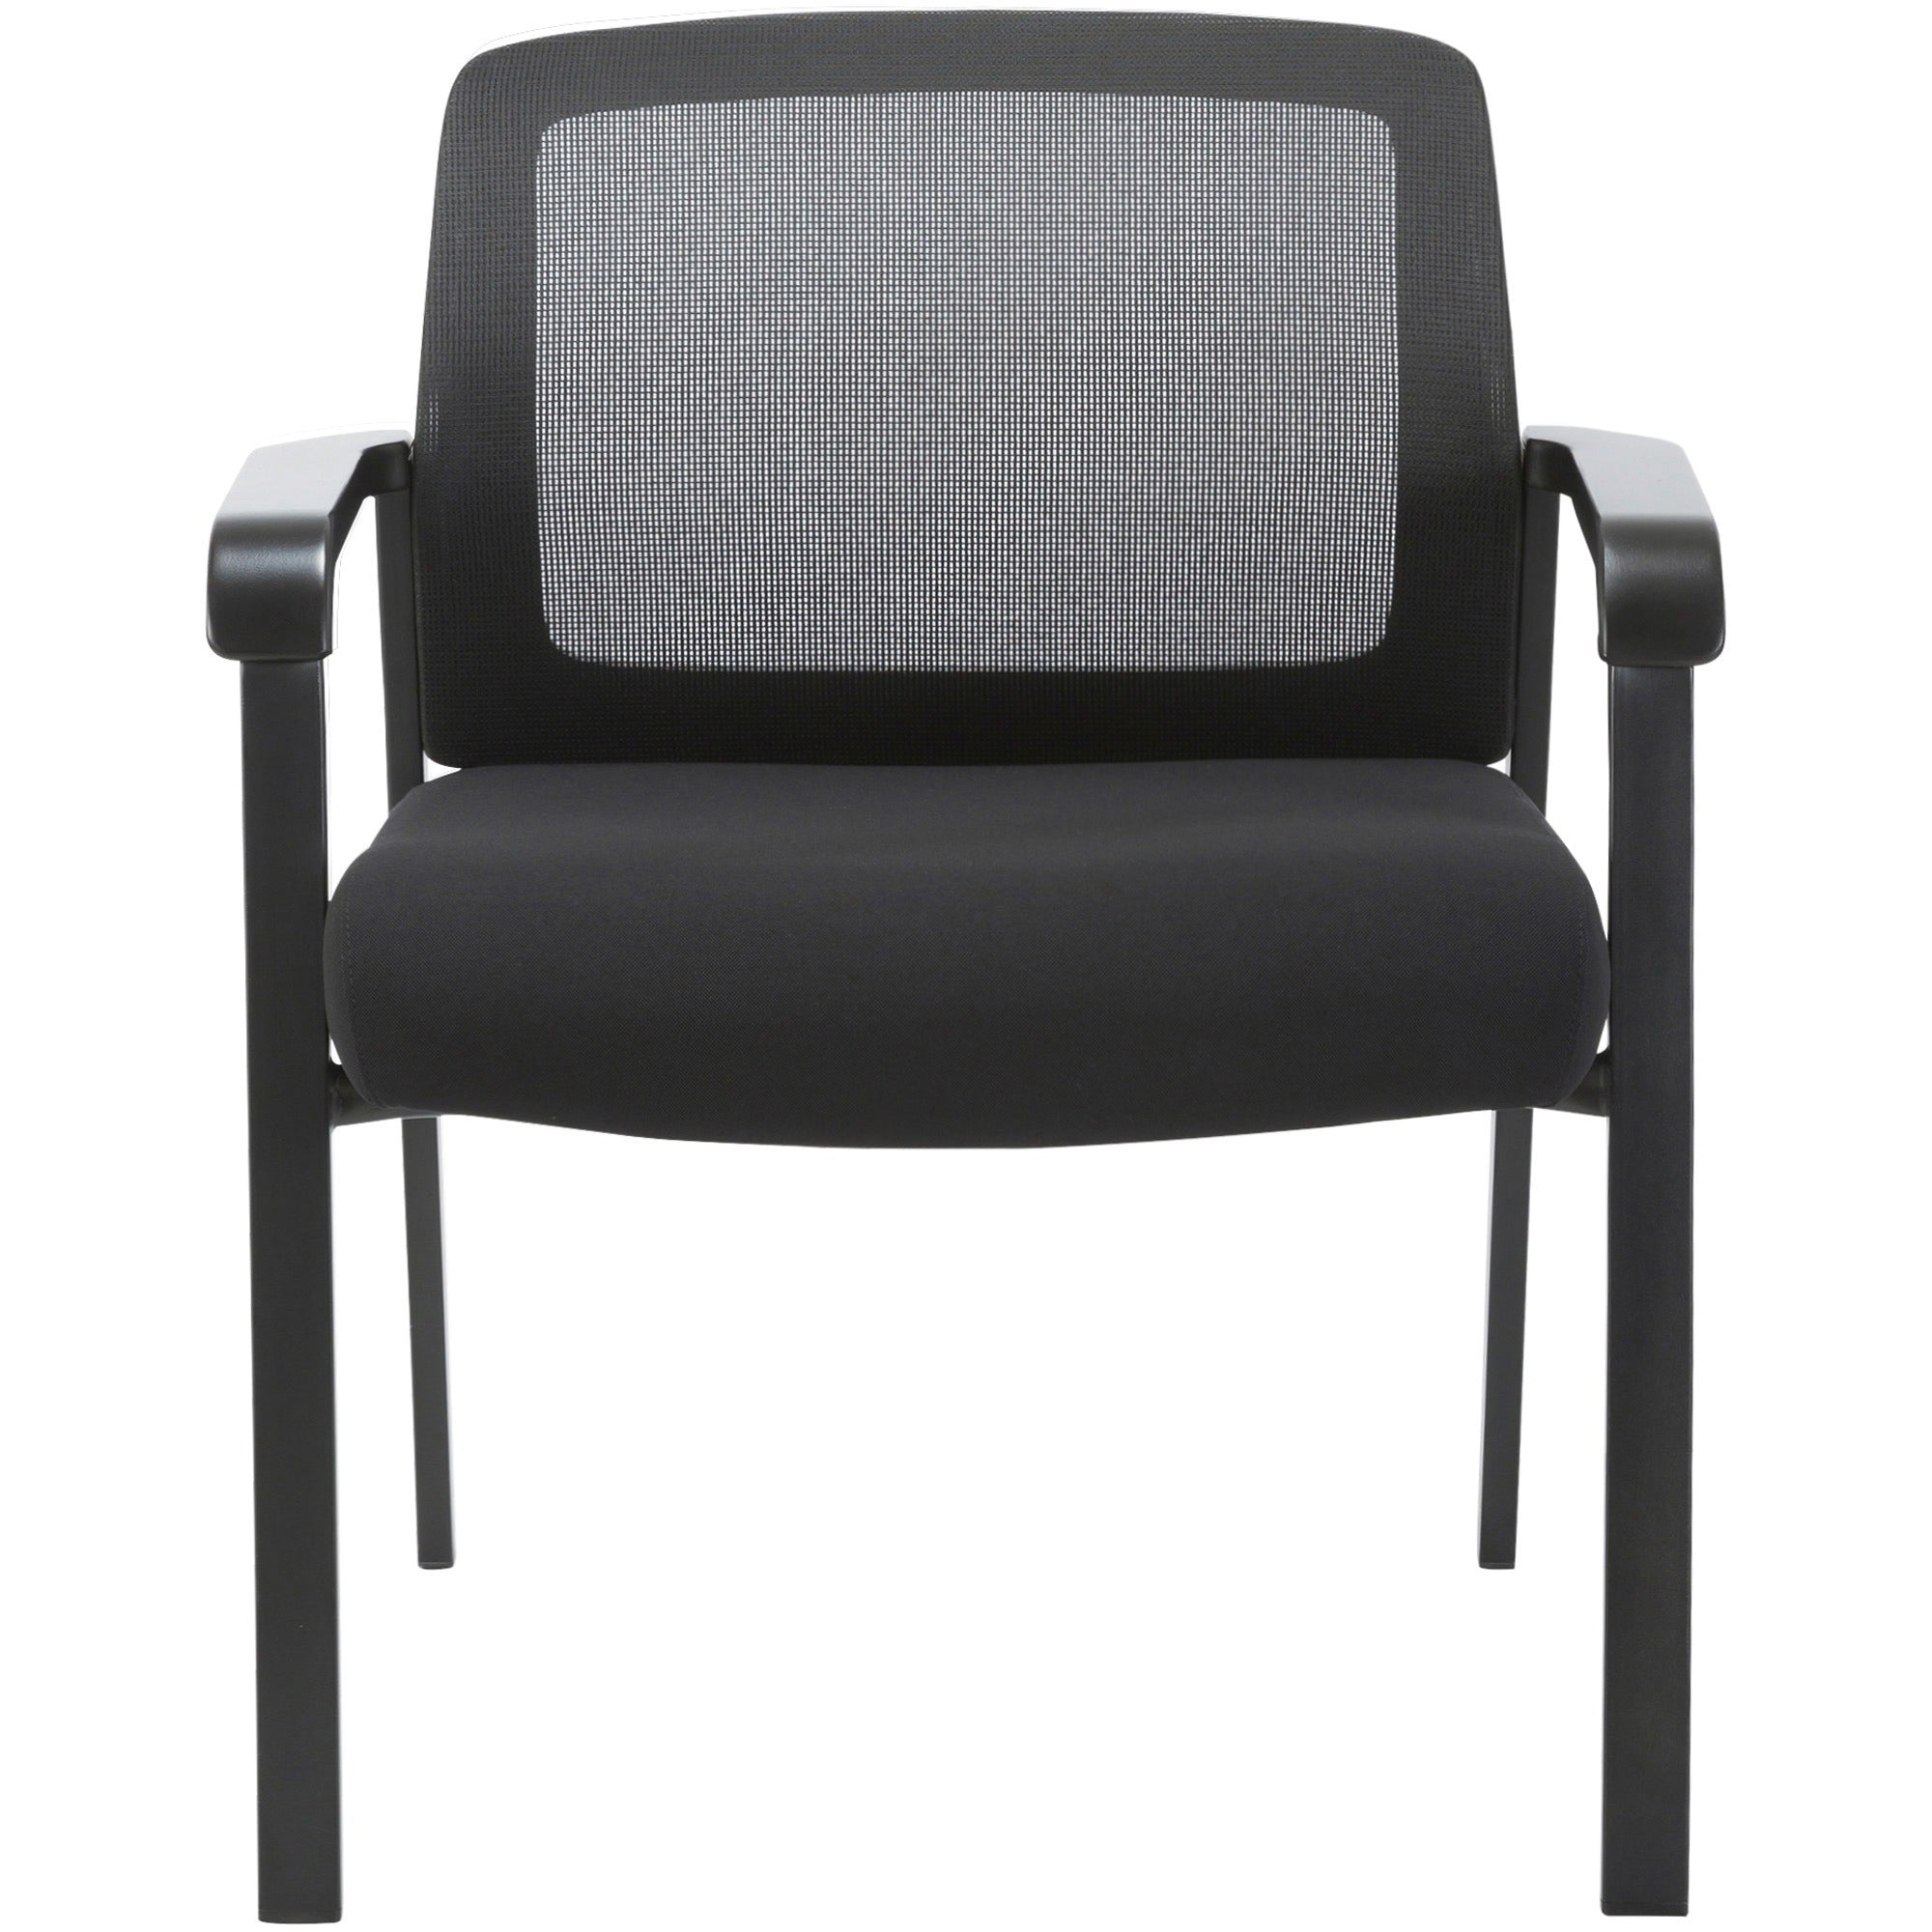 lorell-big-&-tall-mesh-low-back-guest-chair-fabric-seat-mesh-back-steel-frame-low-back-black-1-each_llr67003 - 2